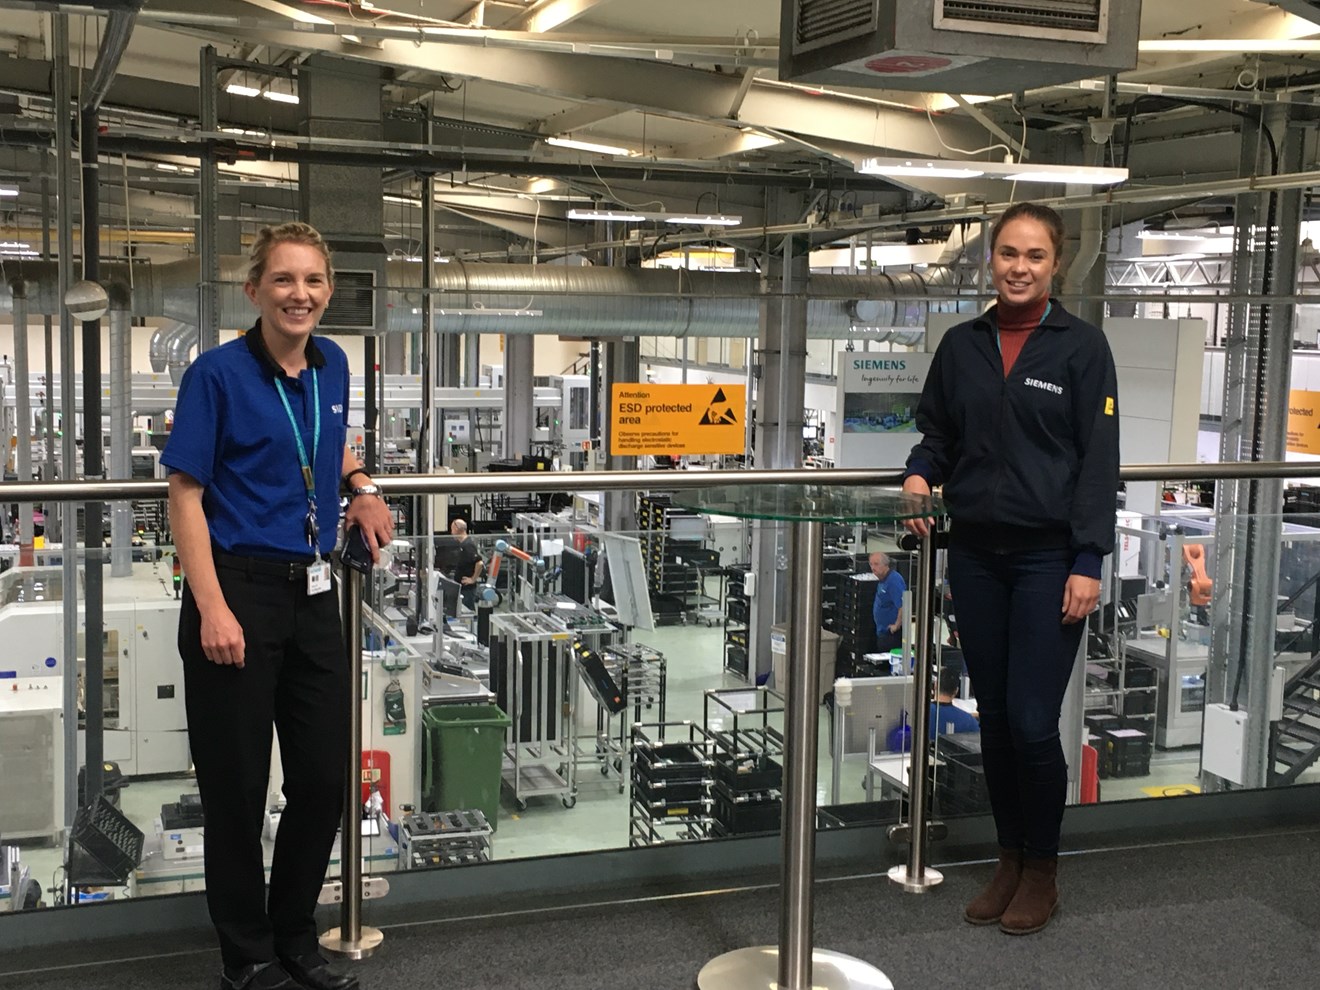 ‘International Women in Engineering Day’: Siemens at forefront of recruiting women into manufacturing: Sarah Black-Smith and Ashleigh Sumner at Siemens factory in Congleton